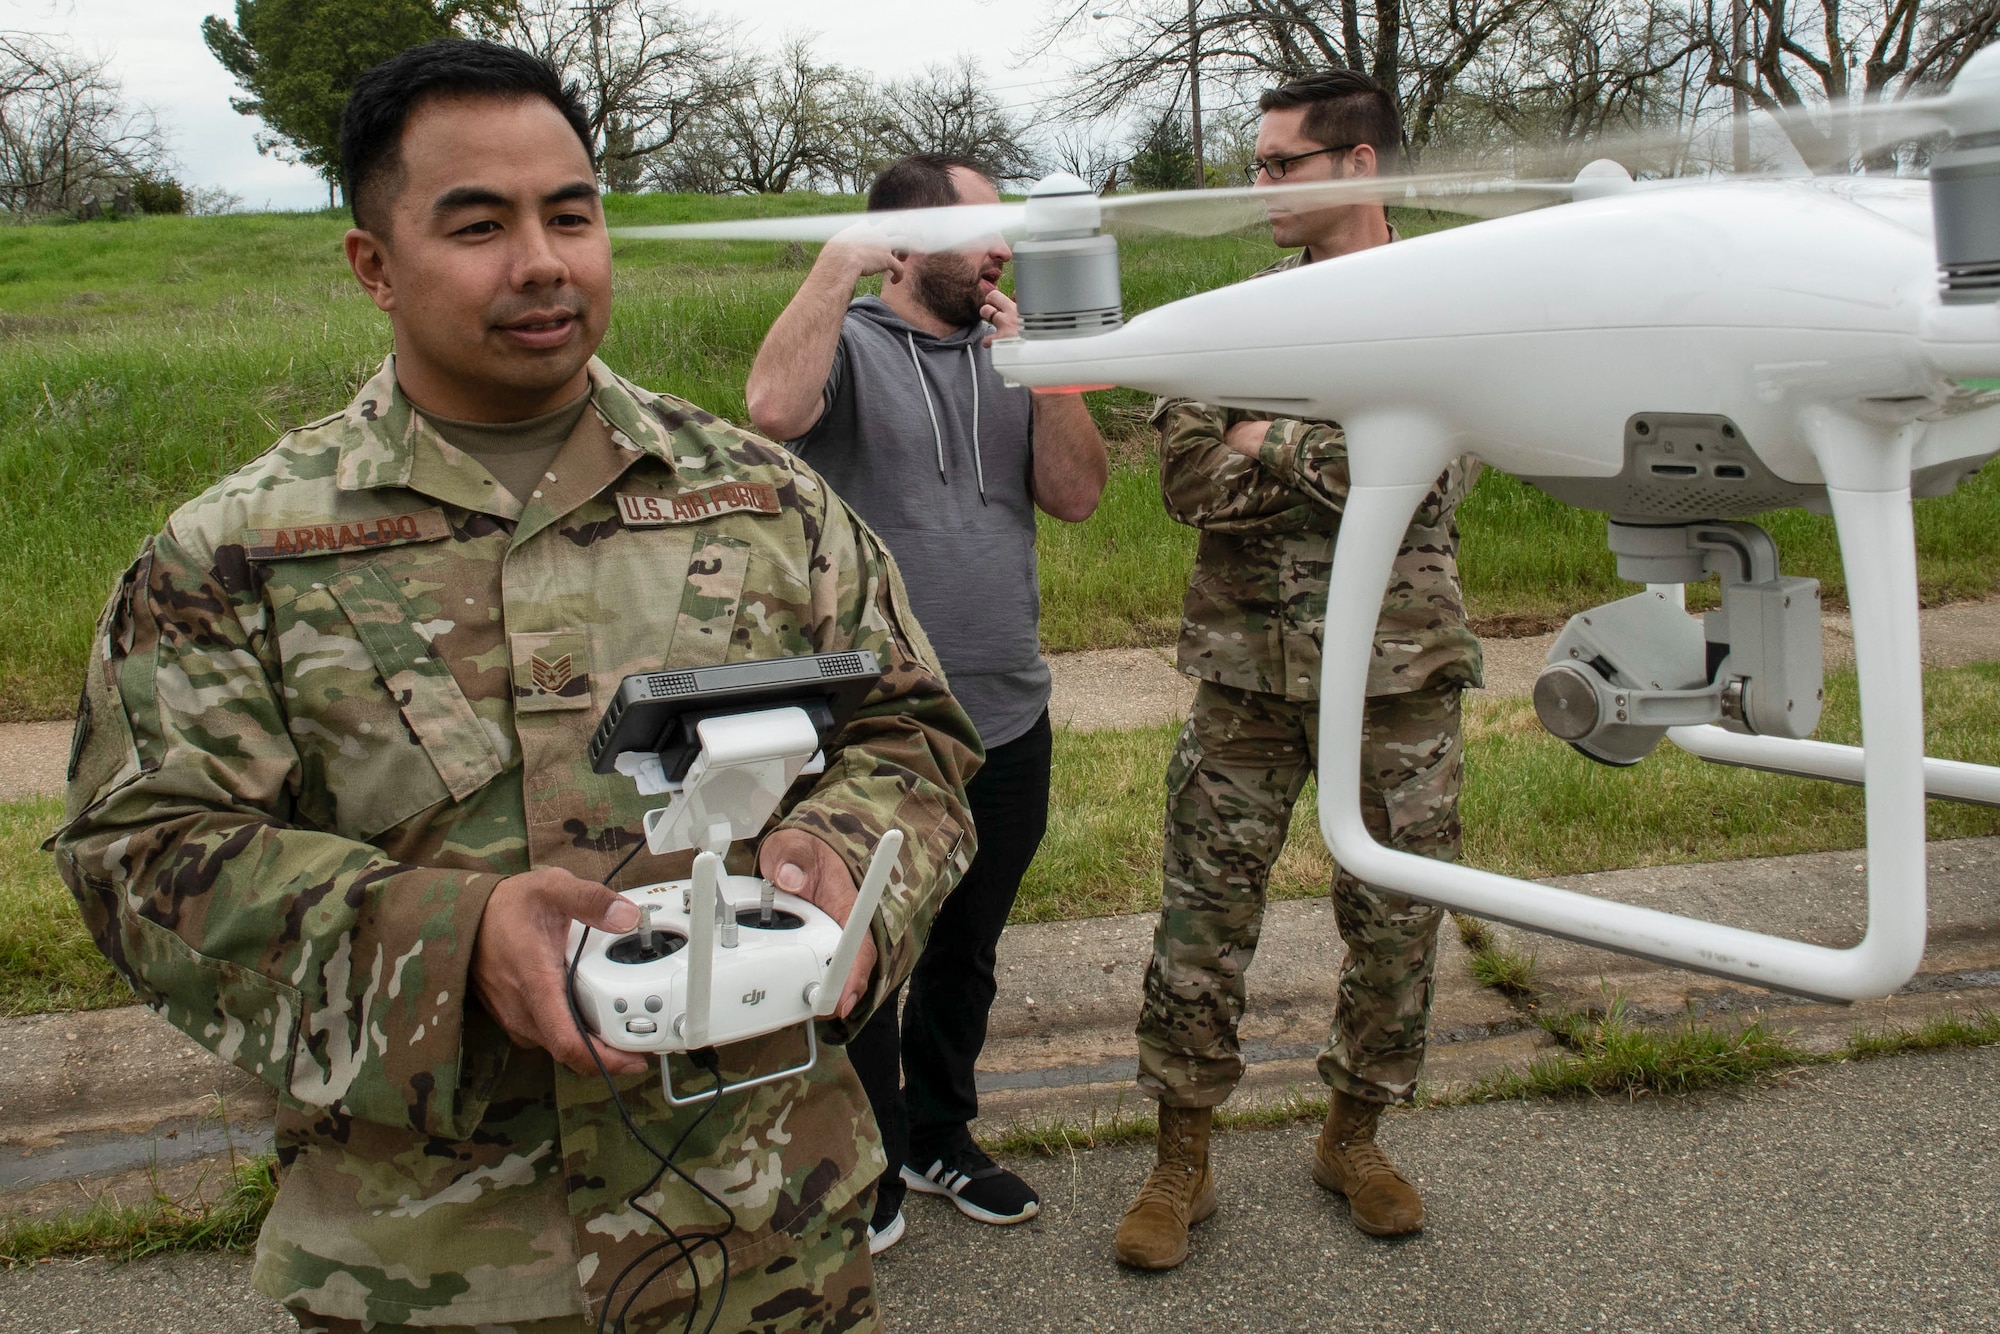 U.S. Air Force Staff Sgt. Francis Arnaldo, 9th Security Forces Squadron resource protection NCO in charge, flies a drone while testing out the Hivemapper program capabilities at Beale Air Force Base, California, April 12, 2019. Beale is currently the first base to beta-test the Hivemapper program, a drone capability that records and senses change detection. (U.S. Air Force photo by Tech. Sgt. Veronica Montes)